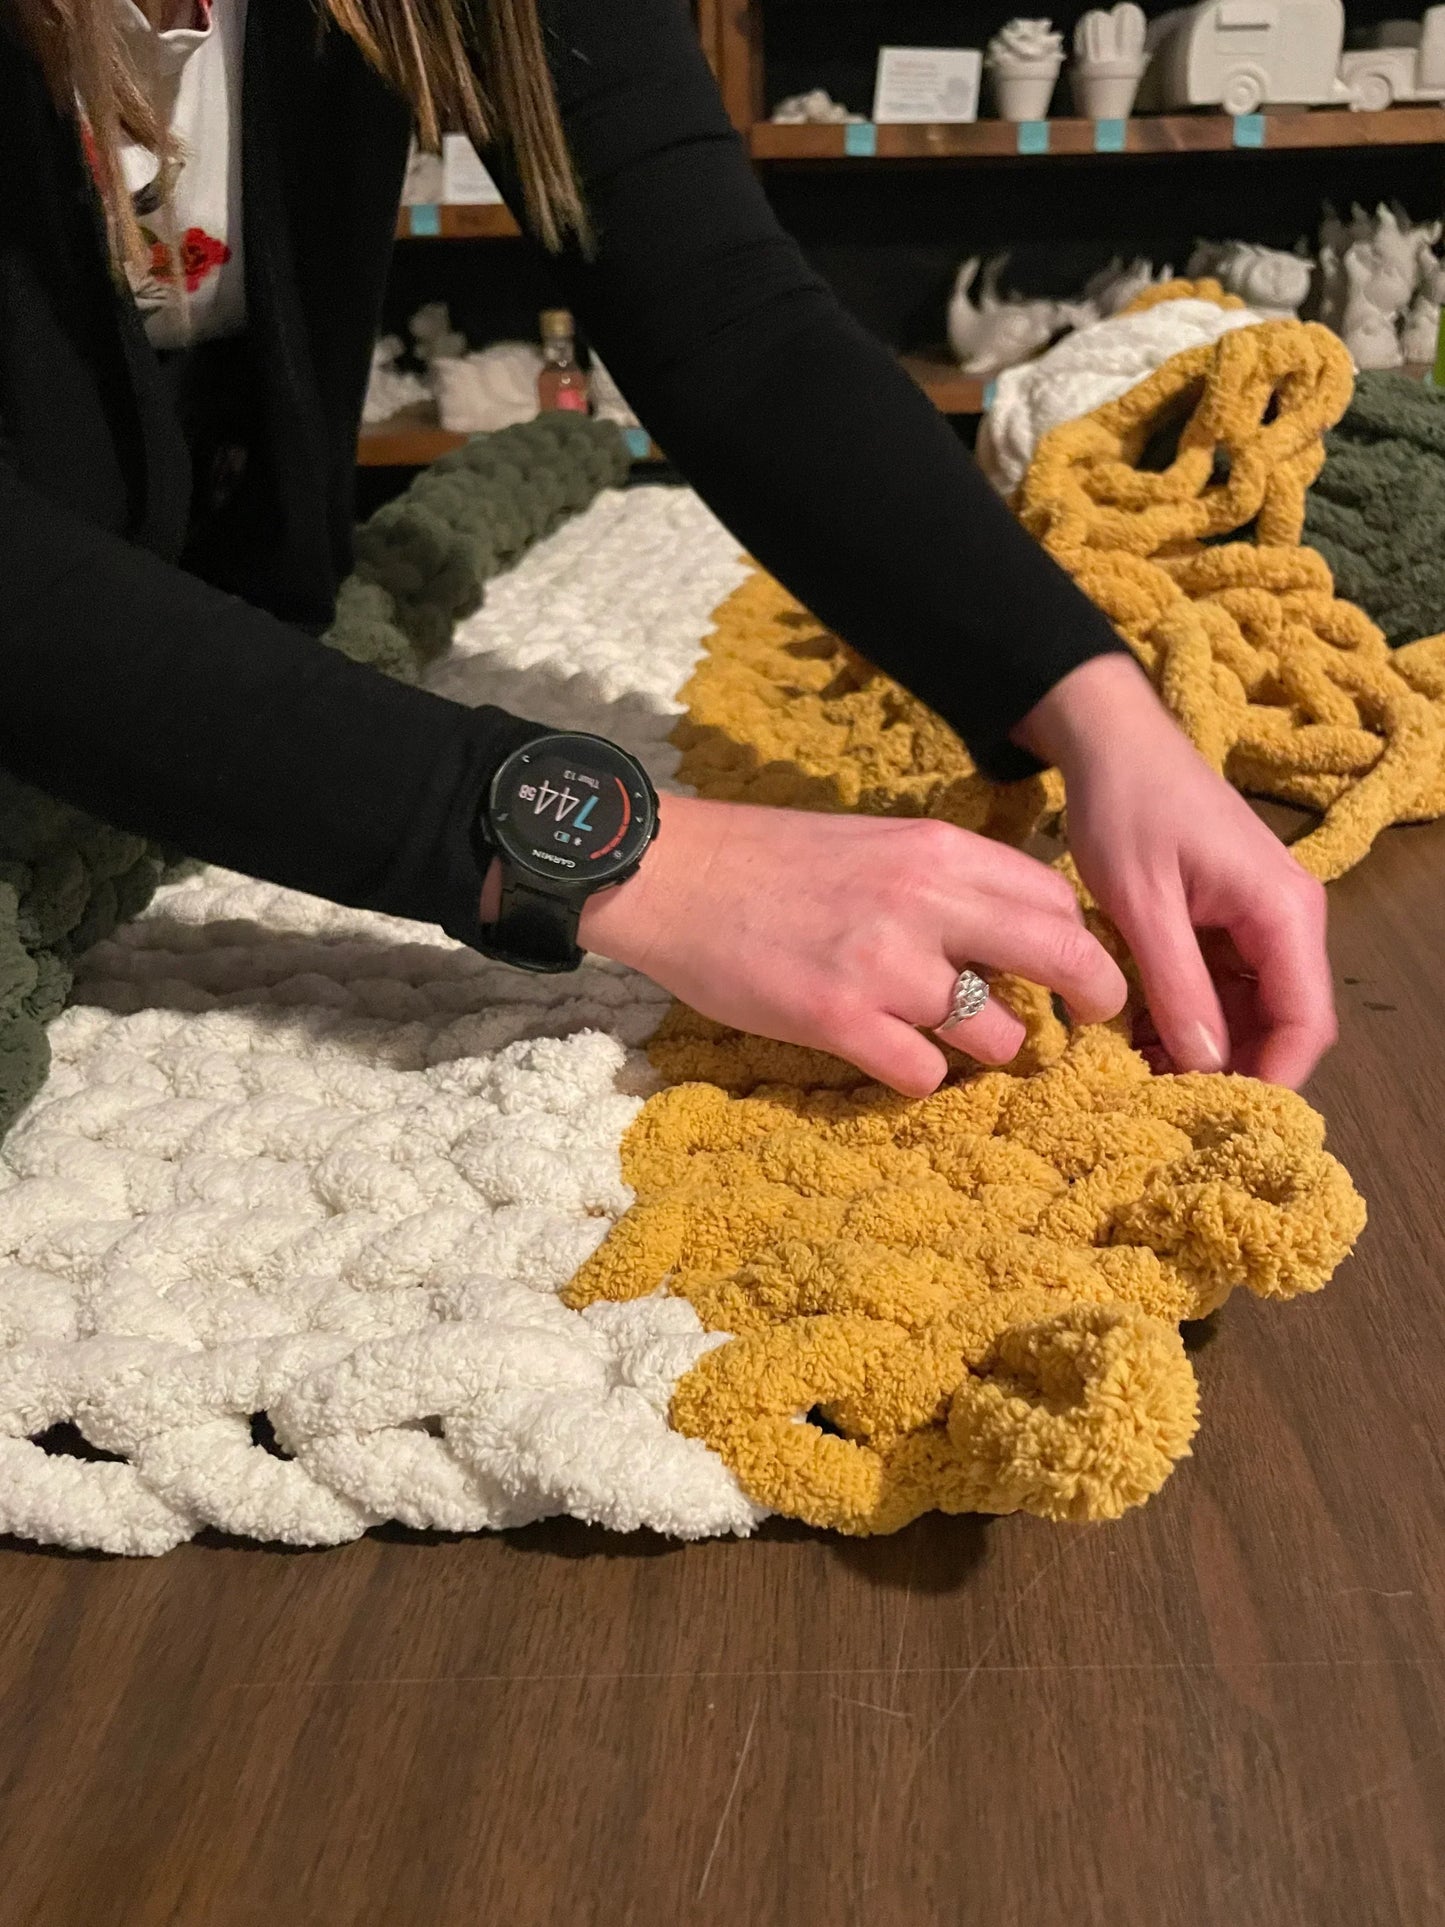 February 16th, 2pm AND 6pm - Chunky Knitted Blanket Workshop